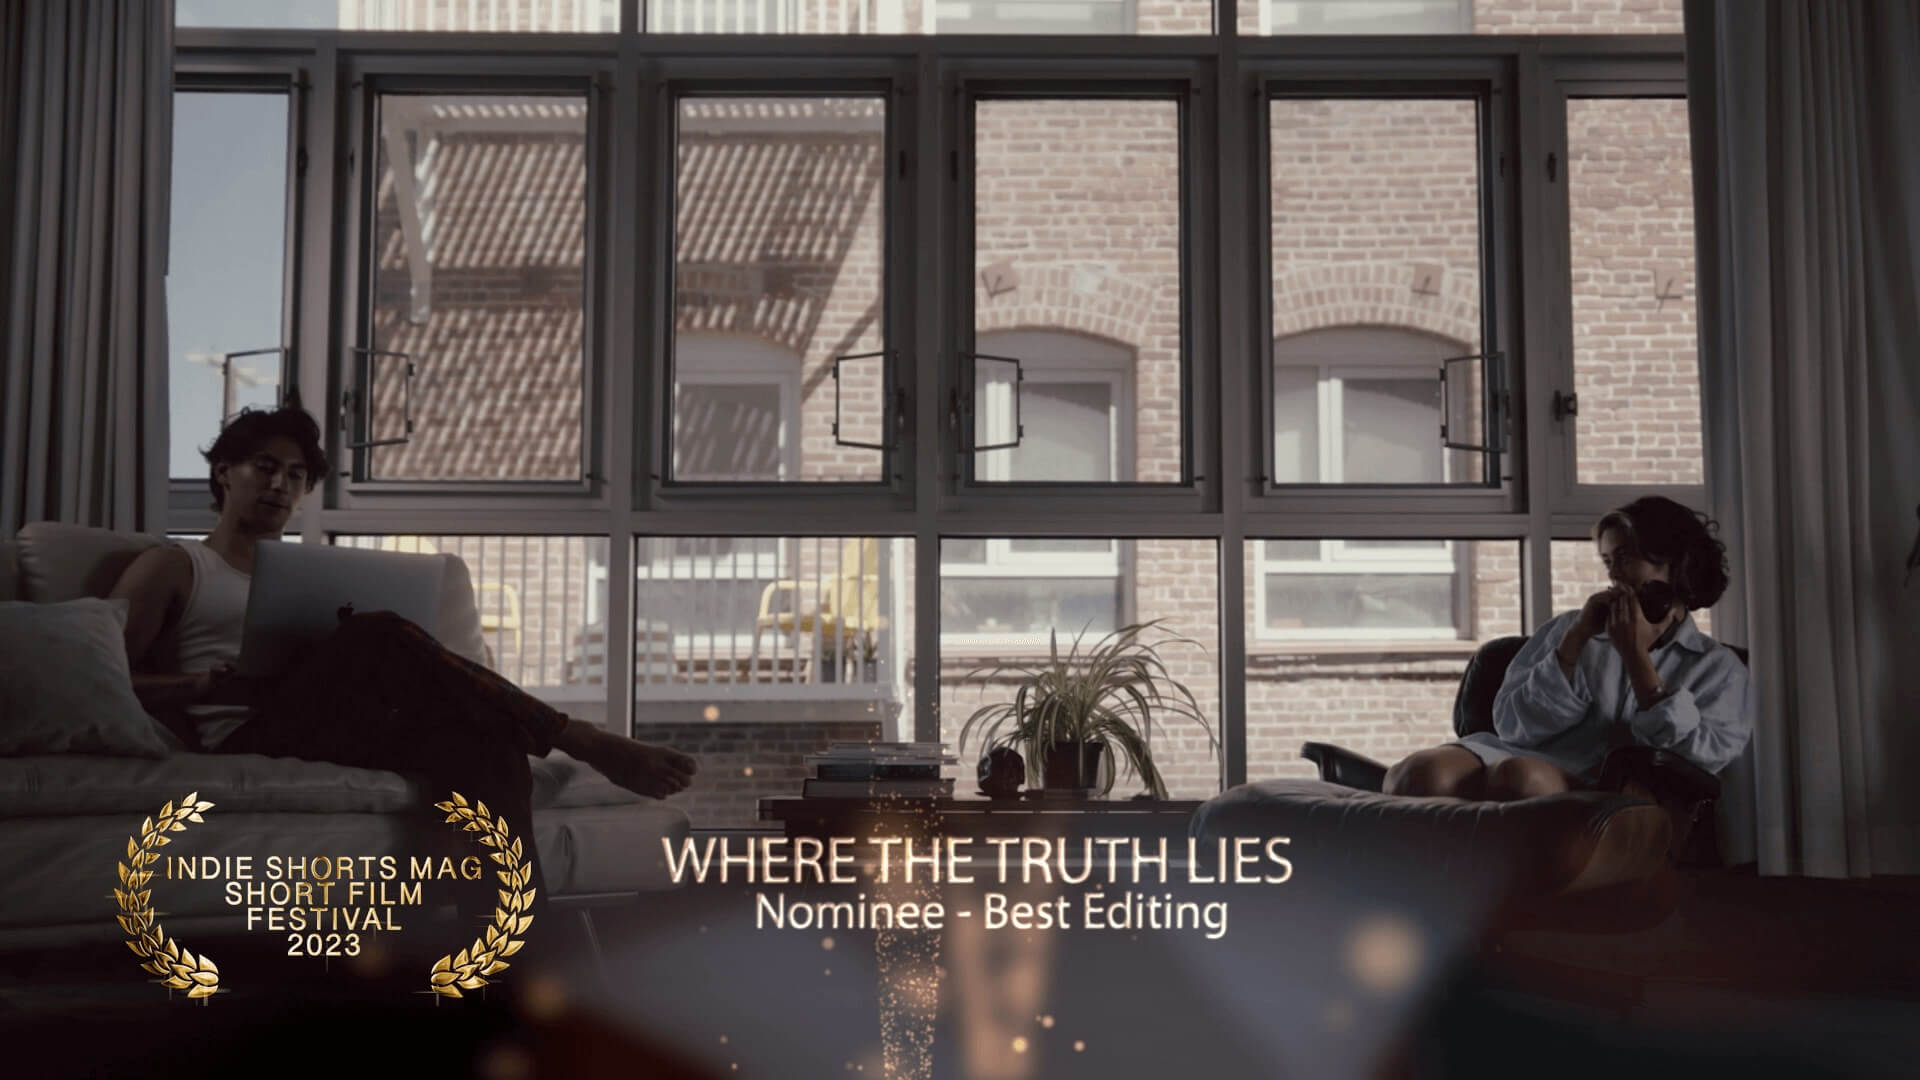 Indie Shorts Mag Short Film Festival - Best Editing - Nominee - Where The Truth Lies